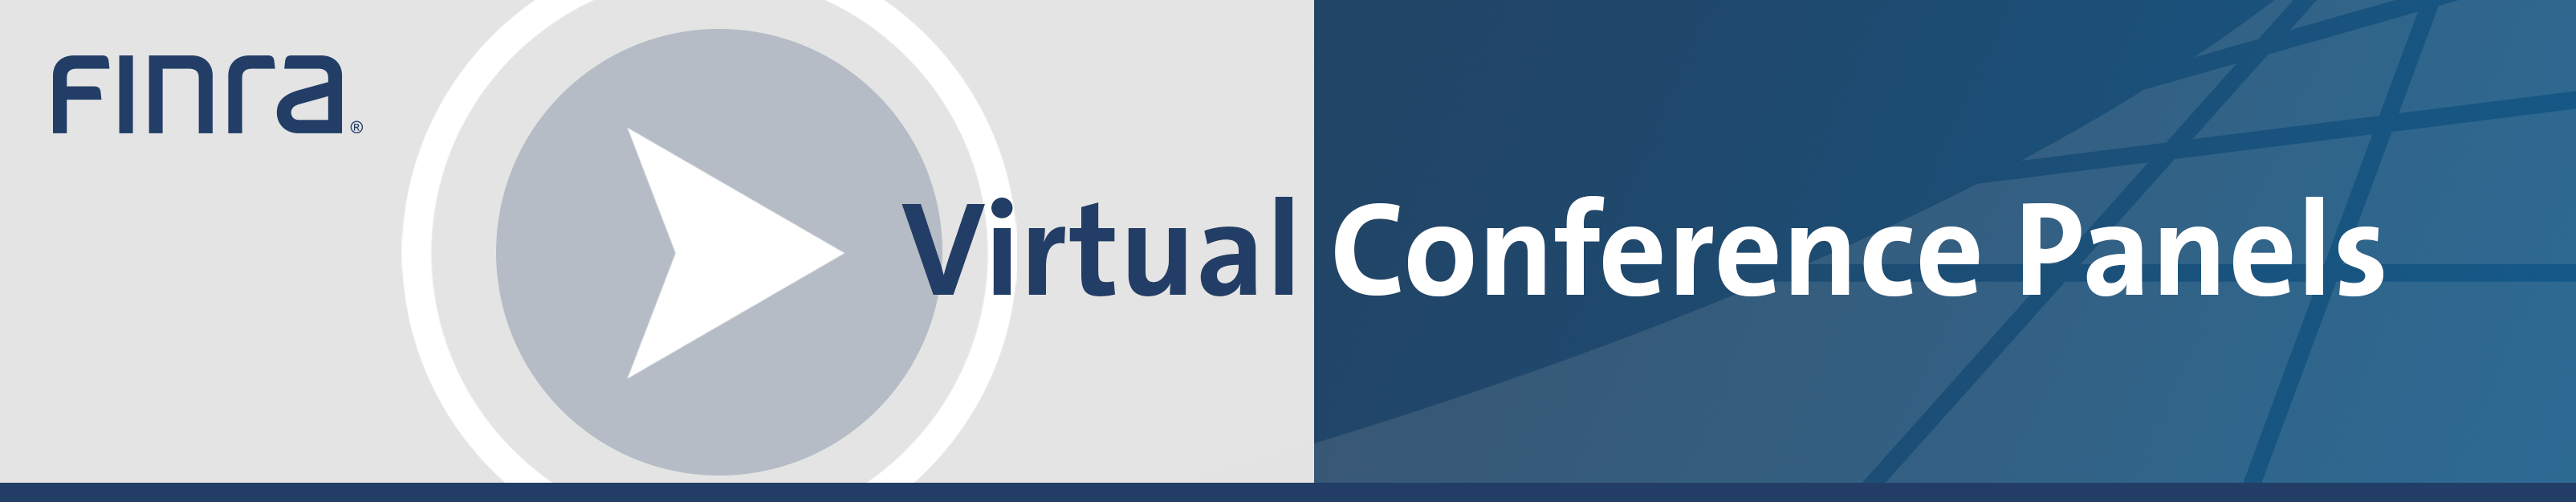 FINRA Virtual Conference Panels